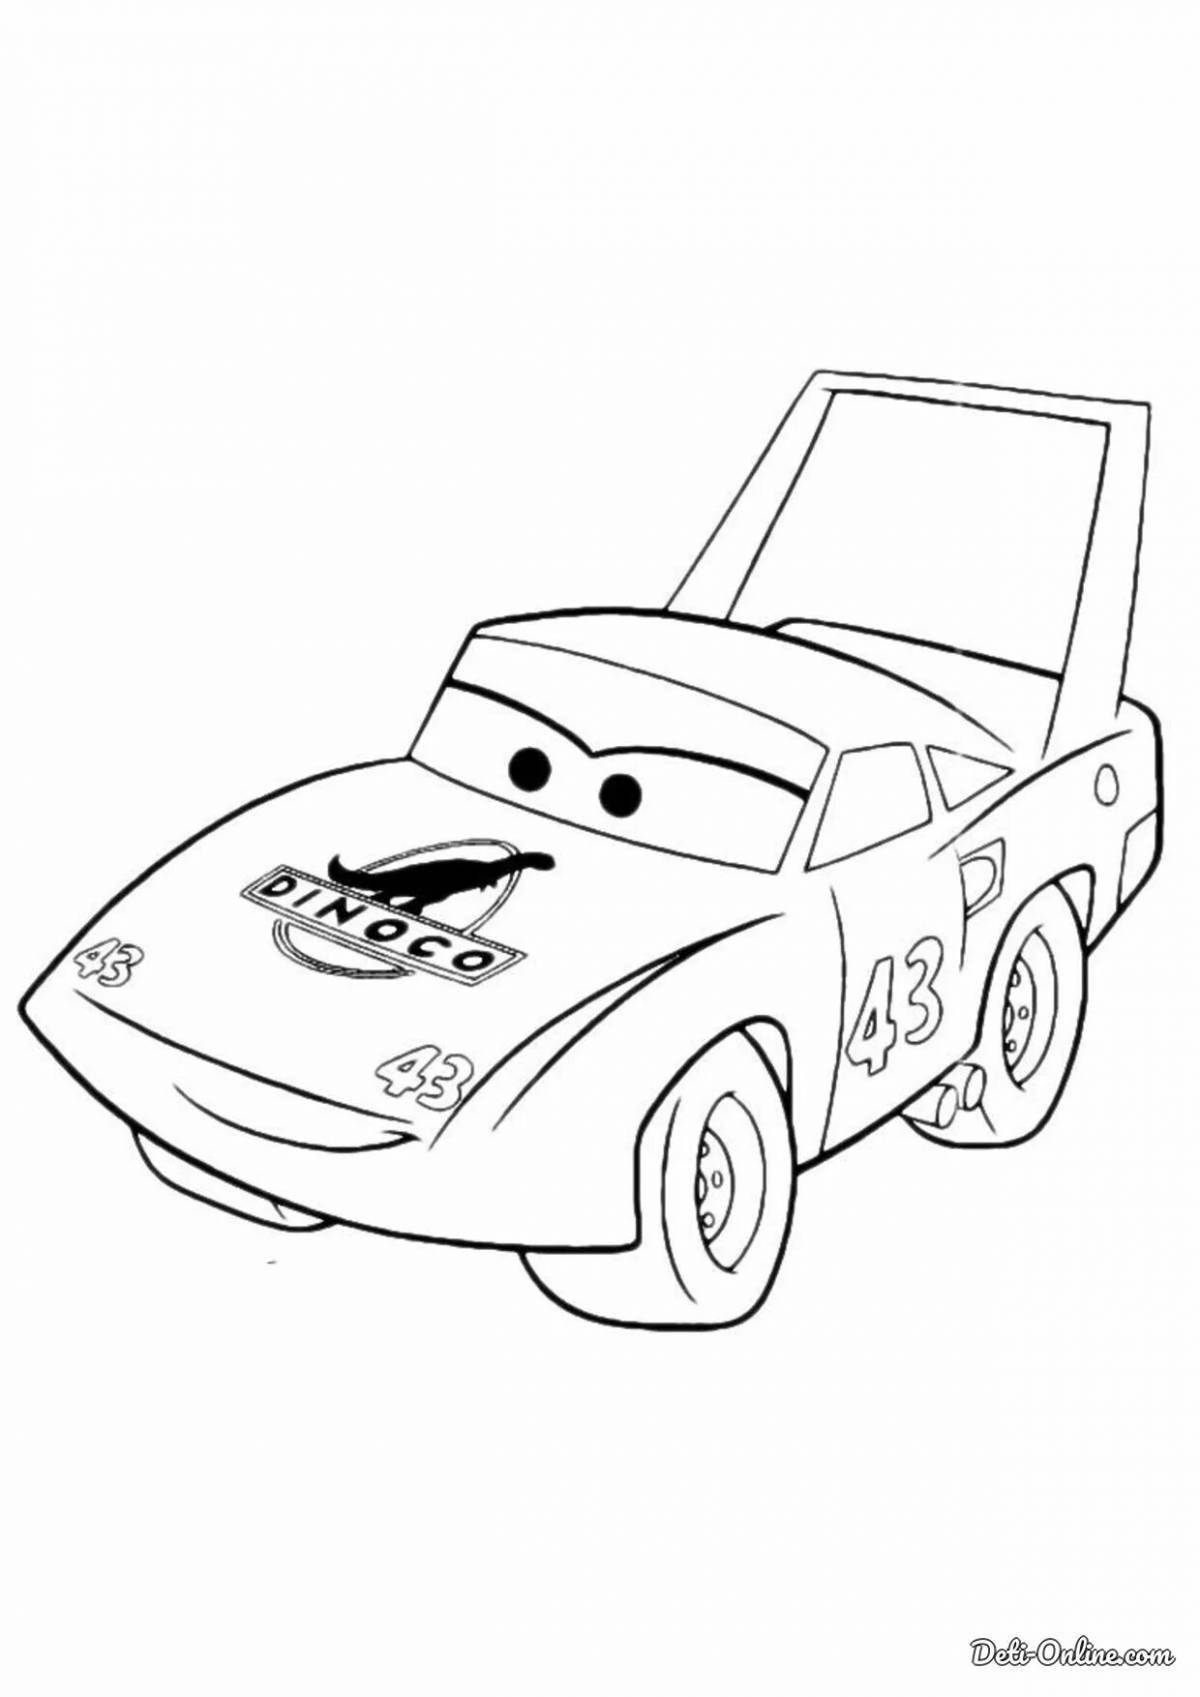 Coloring pages with awesome cartoon cars